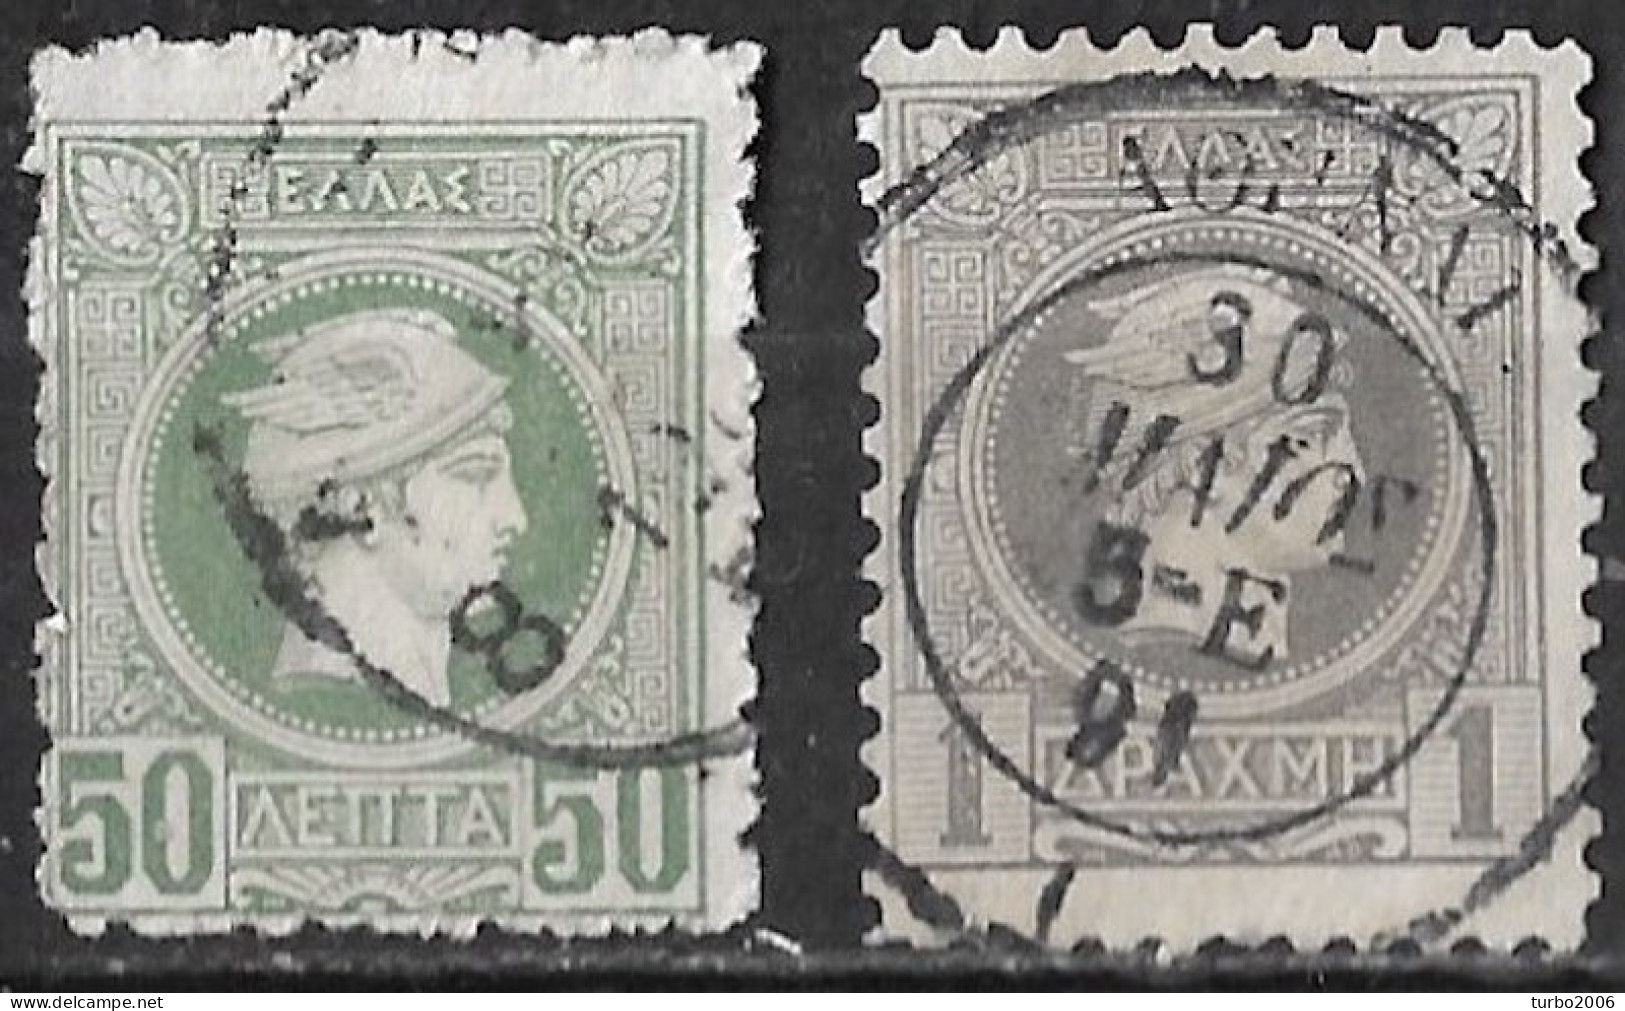 GREECE 1886-1888 Small Hermes Head Belgian Print Perforation 11½ 50 L - 1 Dr. Vl. 86 - 87 - Used Stamps